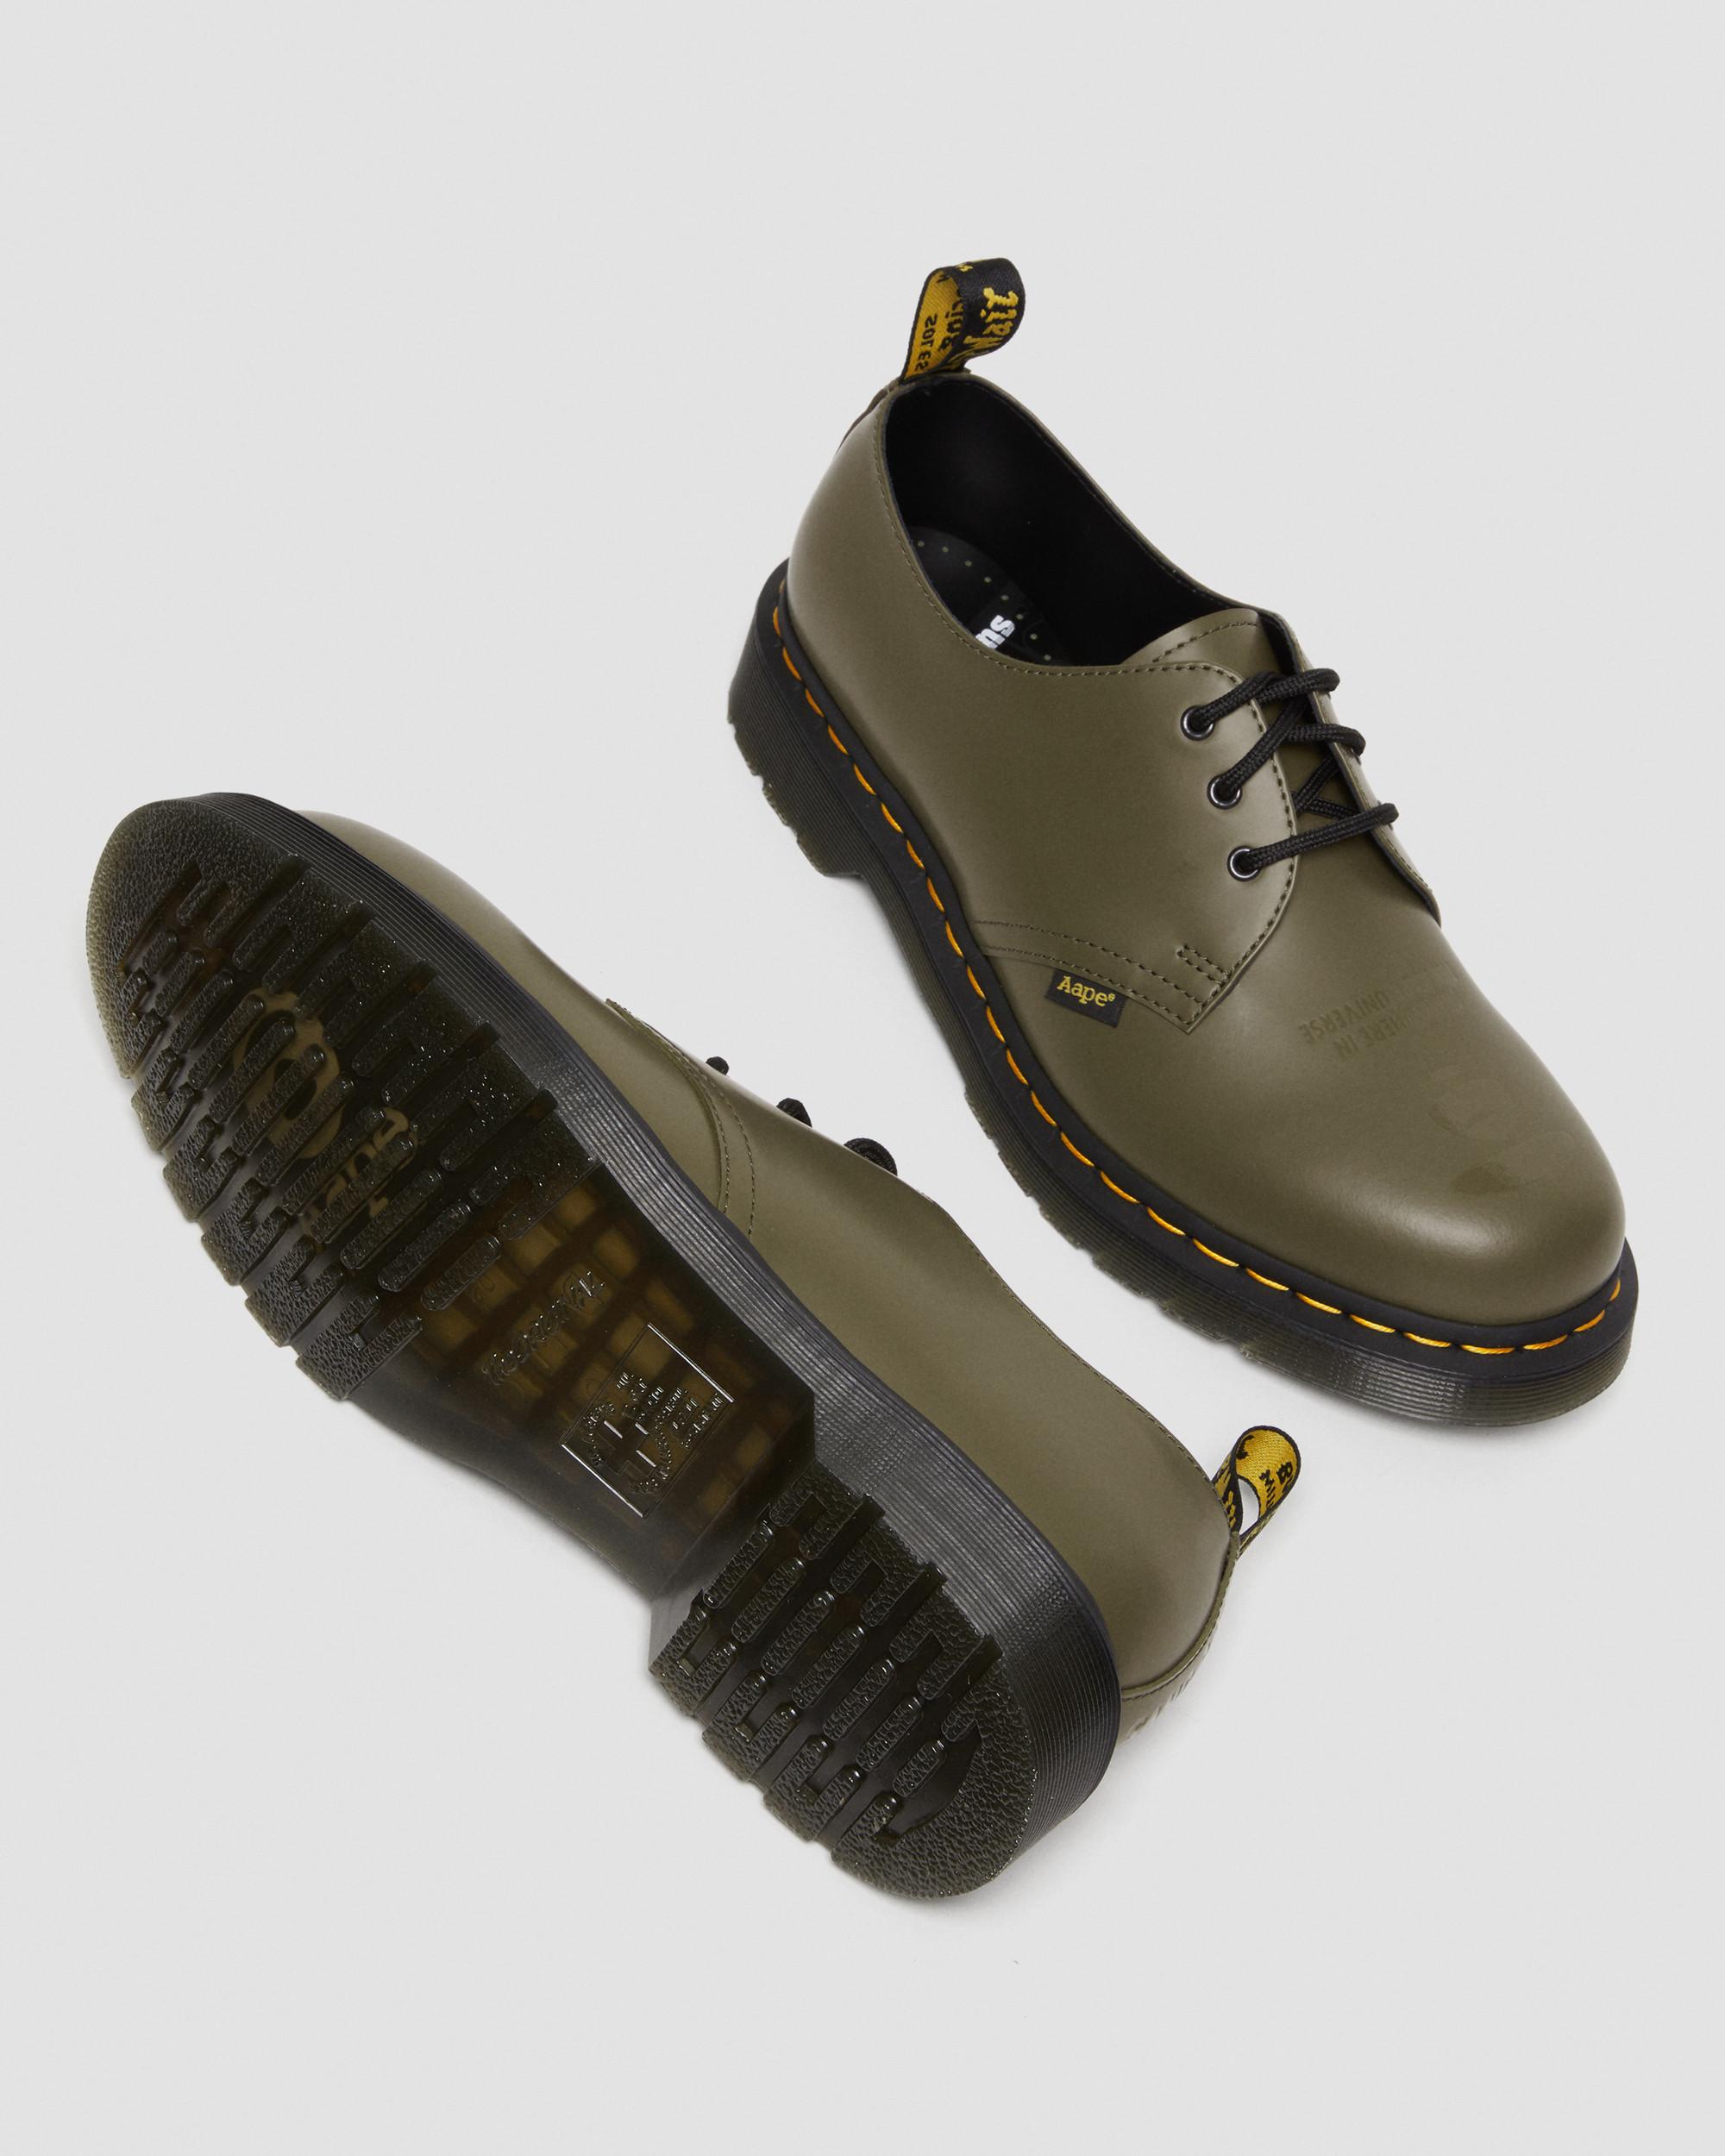 1461 AAPE Smooth Leather Shoes in Olive Green